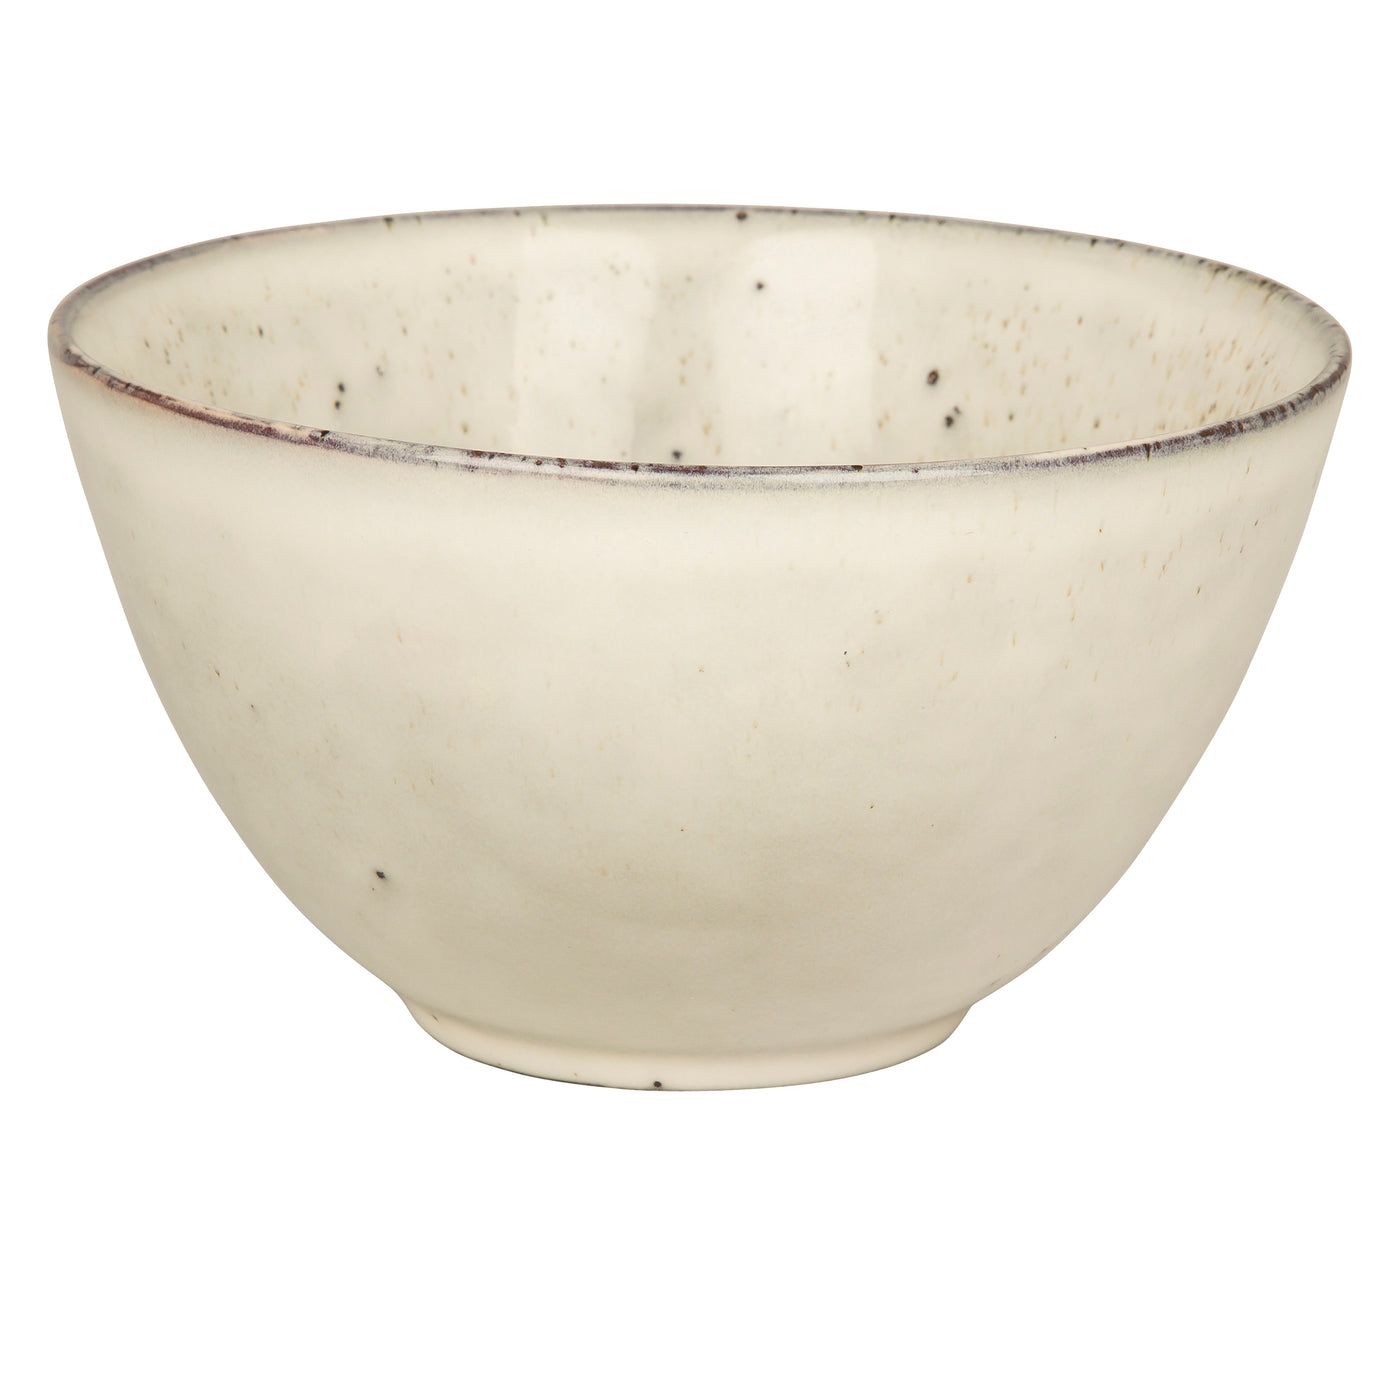 Nordic Sand Cereal Bowl